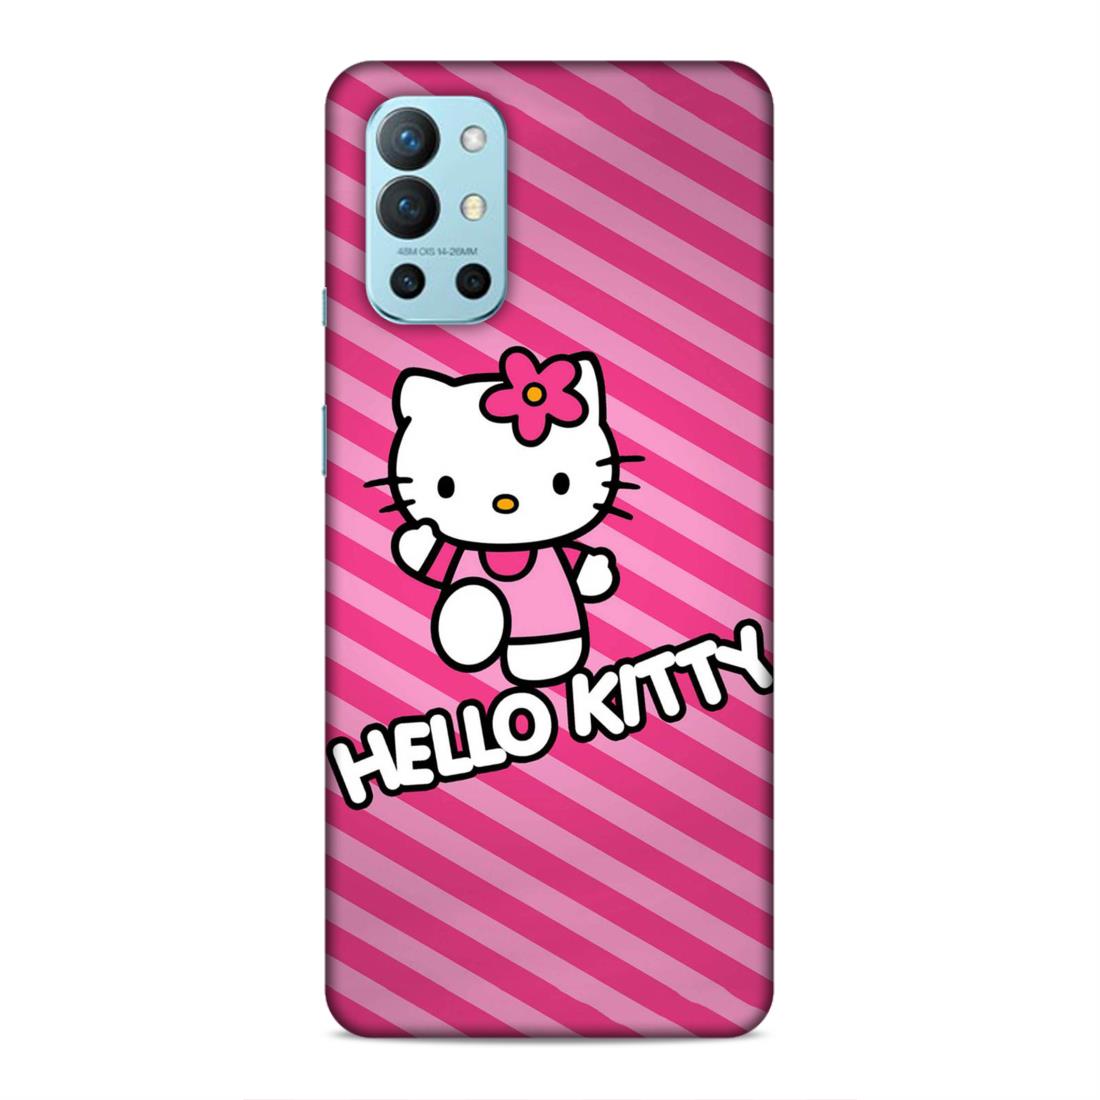 Hello Kitty Hard Back Case For OnePlus 8T / 9R